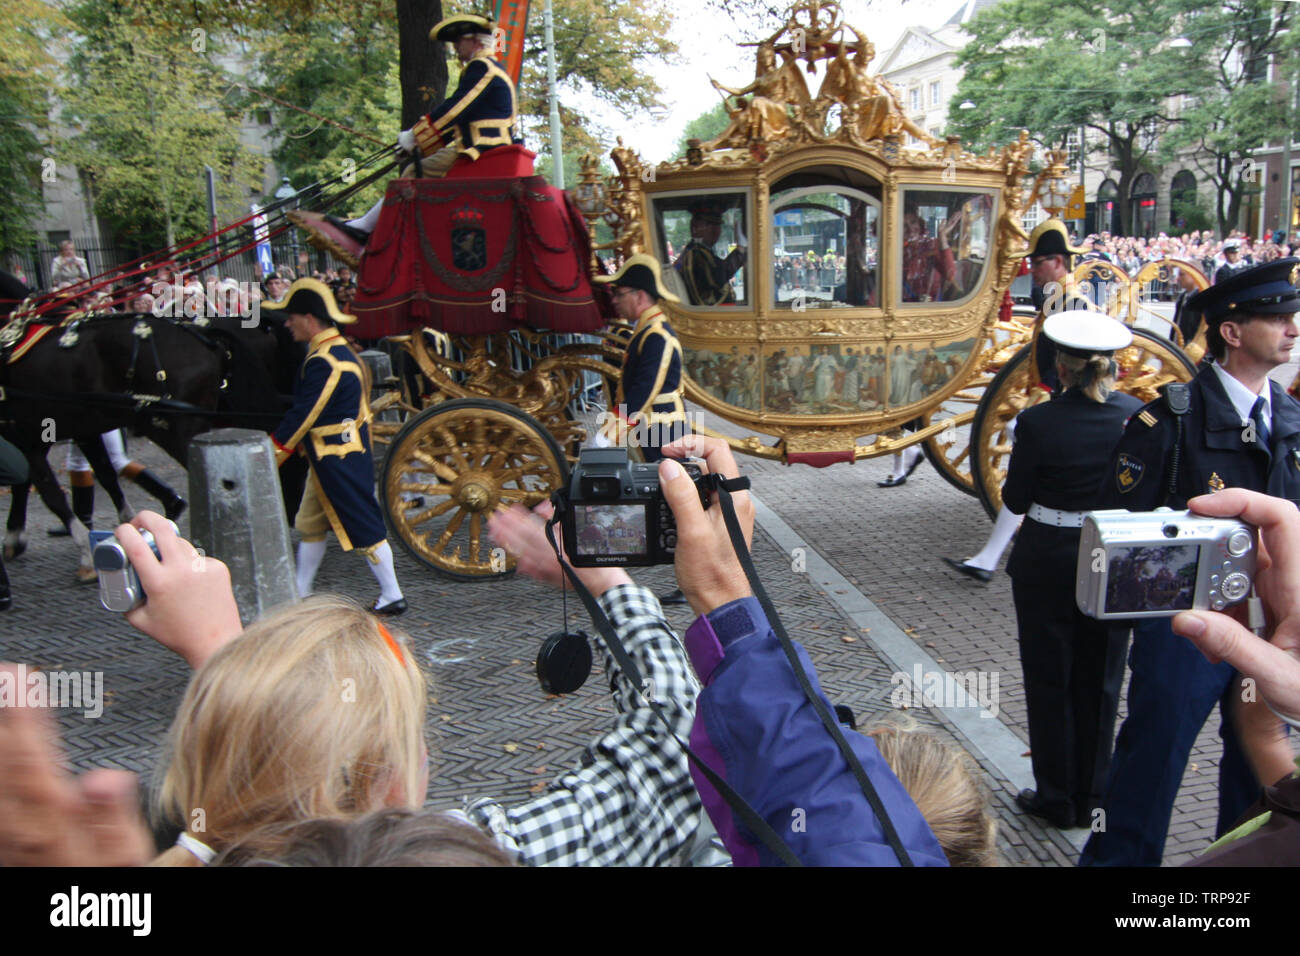 People were gathering alongside the street and taking photos when Queen Beatrix on the golden carriage was passing by at Prinsjesdag procession Stock Photo